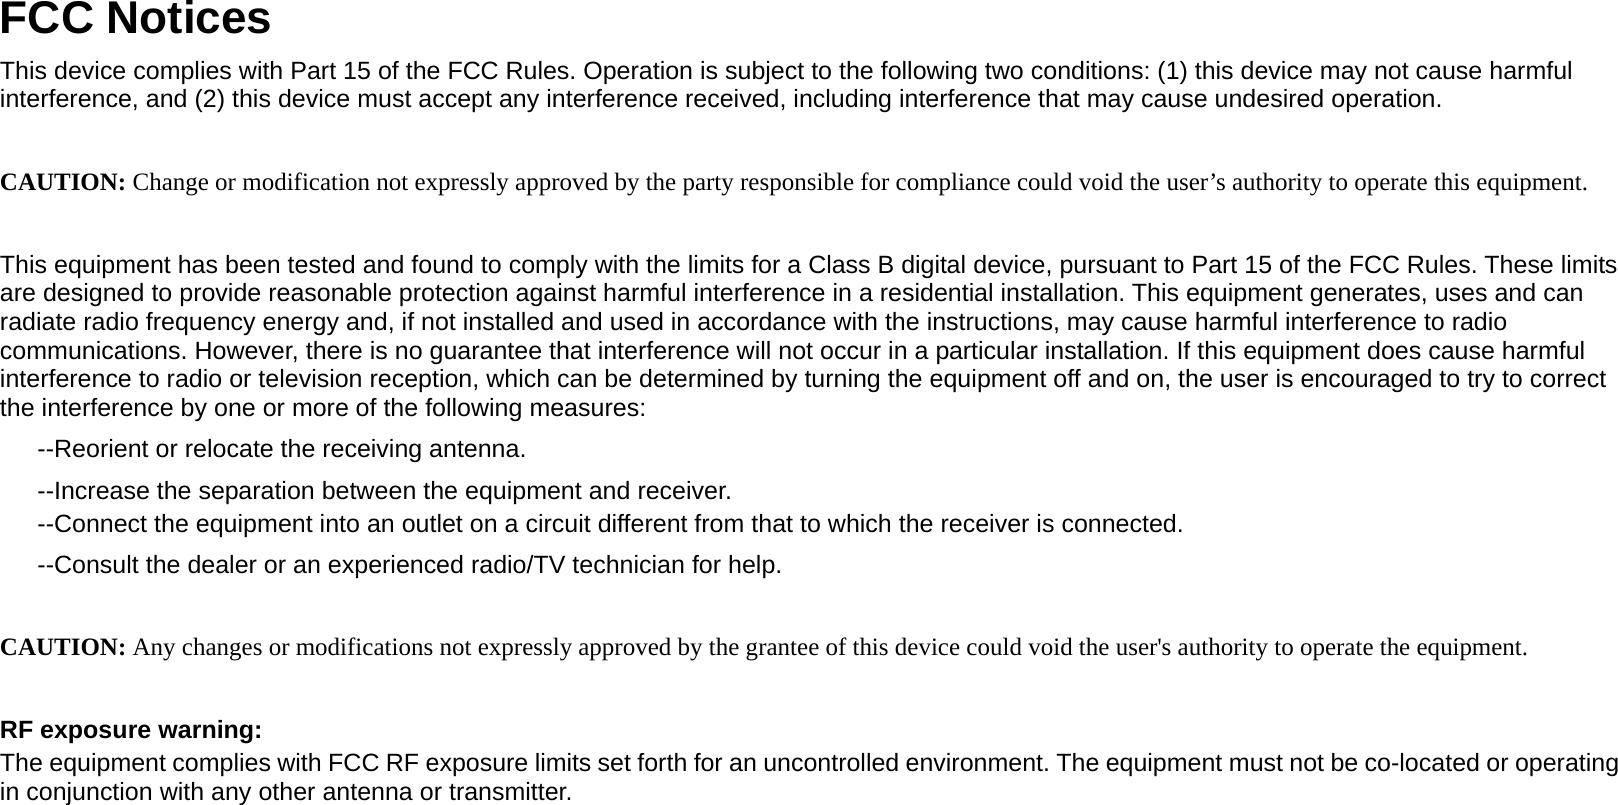                                      FCC Notices This device complies with Part 15 of the FCC Rules. Operation is subject to the following two conditions: (1) this device may not cause harmful interference, and (2) this device must accept any interference received, including interference that may cause undesired operation.  CAUTION: Change or modification not expressly approved by the party responsible for compliance could void the user’s authority to operate this equipment.  This equipment has been tested and found to comply with the limits for a Class B digital device, pursuant to Part 15 of the FCC Rules. These limits are designed to provide reasonable protection against harmful interference in a residential installation. This equipment generates, uses and can radiate radio frequency energy and, if not installed and used in accordance with the instructions, may cause harmful interference to radio communications. However, there is no guarantee that interference will not occur in a particular installation. If this equipment does cause harmful interference to radio or television reception, which can be determined by turning the equipment off and on, the user is encouraged to try to correct the interference by one or more of the following measures: --Reorient or relocate the receiving antenna. --Increase the separation between the equipment and receiver. --Connect the equipment into an outlet on a circuit different from that to which the receiver is connected. --Consult the dealer or an experienced radio/TV technician for help.  CAUTION: Any changes or modifications not expressly approved by the grantee of this device could void the user&apos;s authority to operate the equipment.  RF exposure warning: The equipment complies with FCC RF exposure limits set forth for an uncontrolled environment. The equipment must not be co-located or operating in conjunction with any other antenna or transmitter.